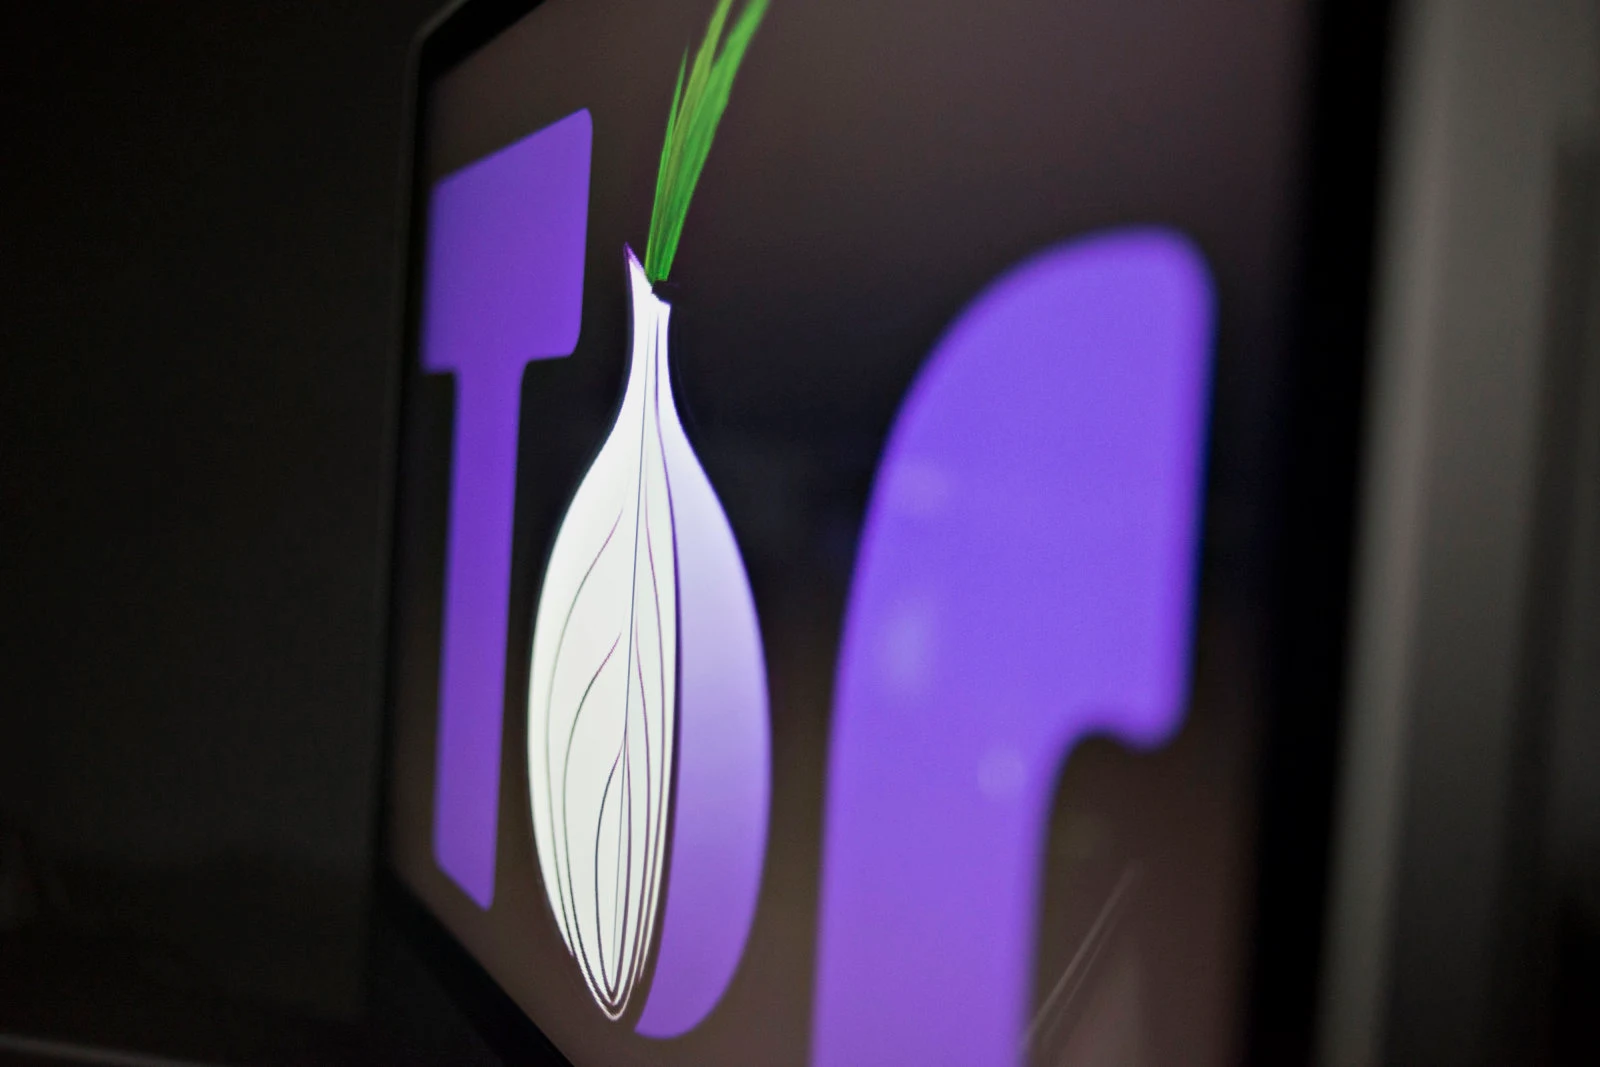 A new study shows that Tor is vulnerable to app de-anonymization attacks on Android smartphones through network traffic analysis.